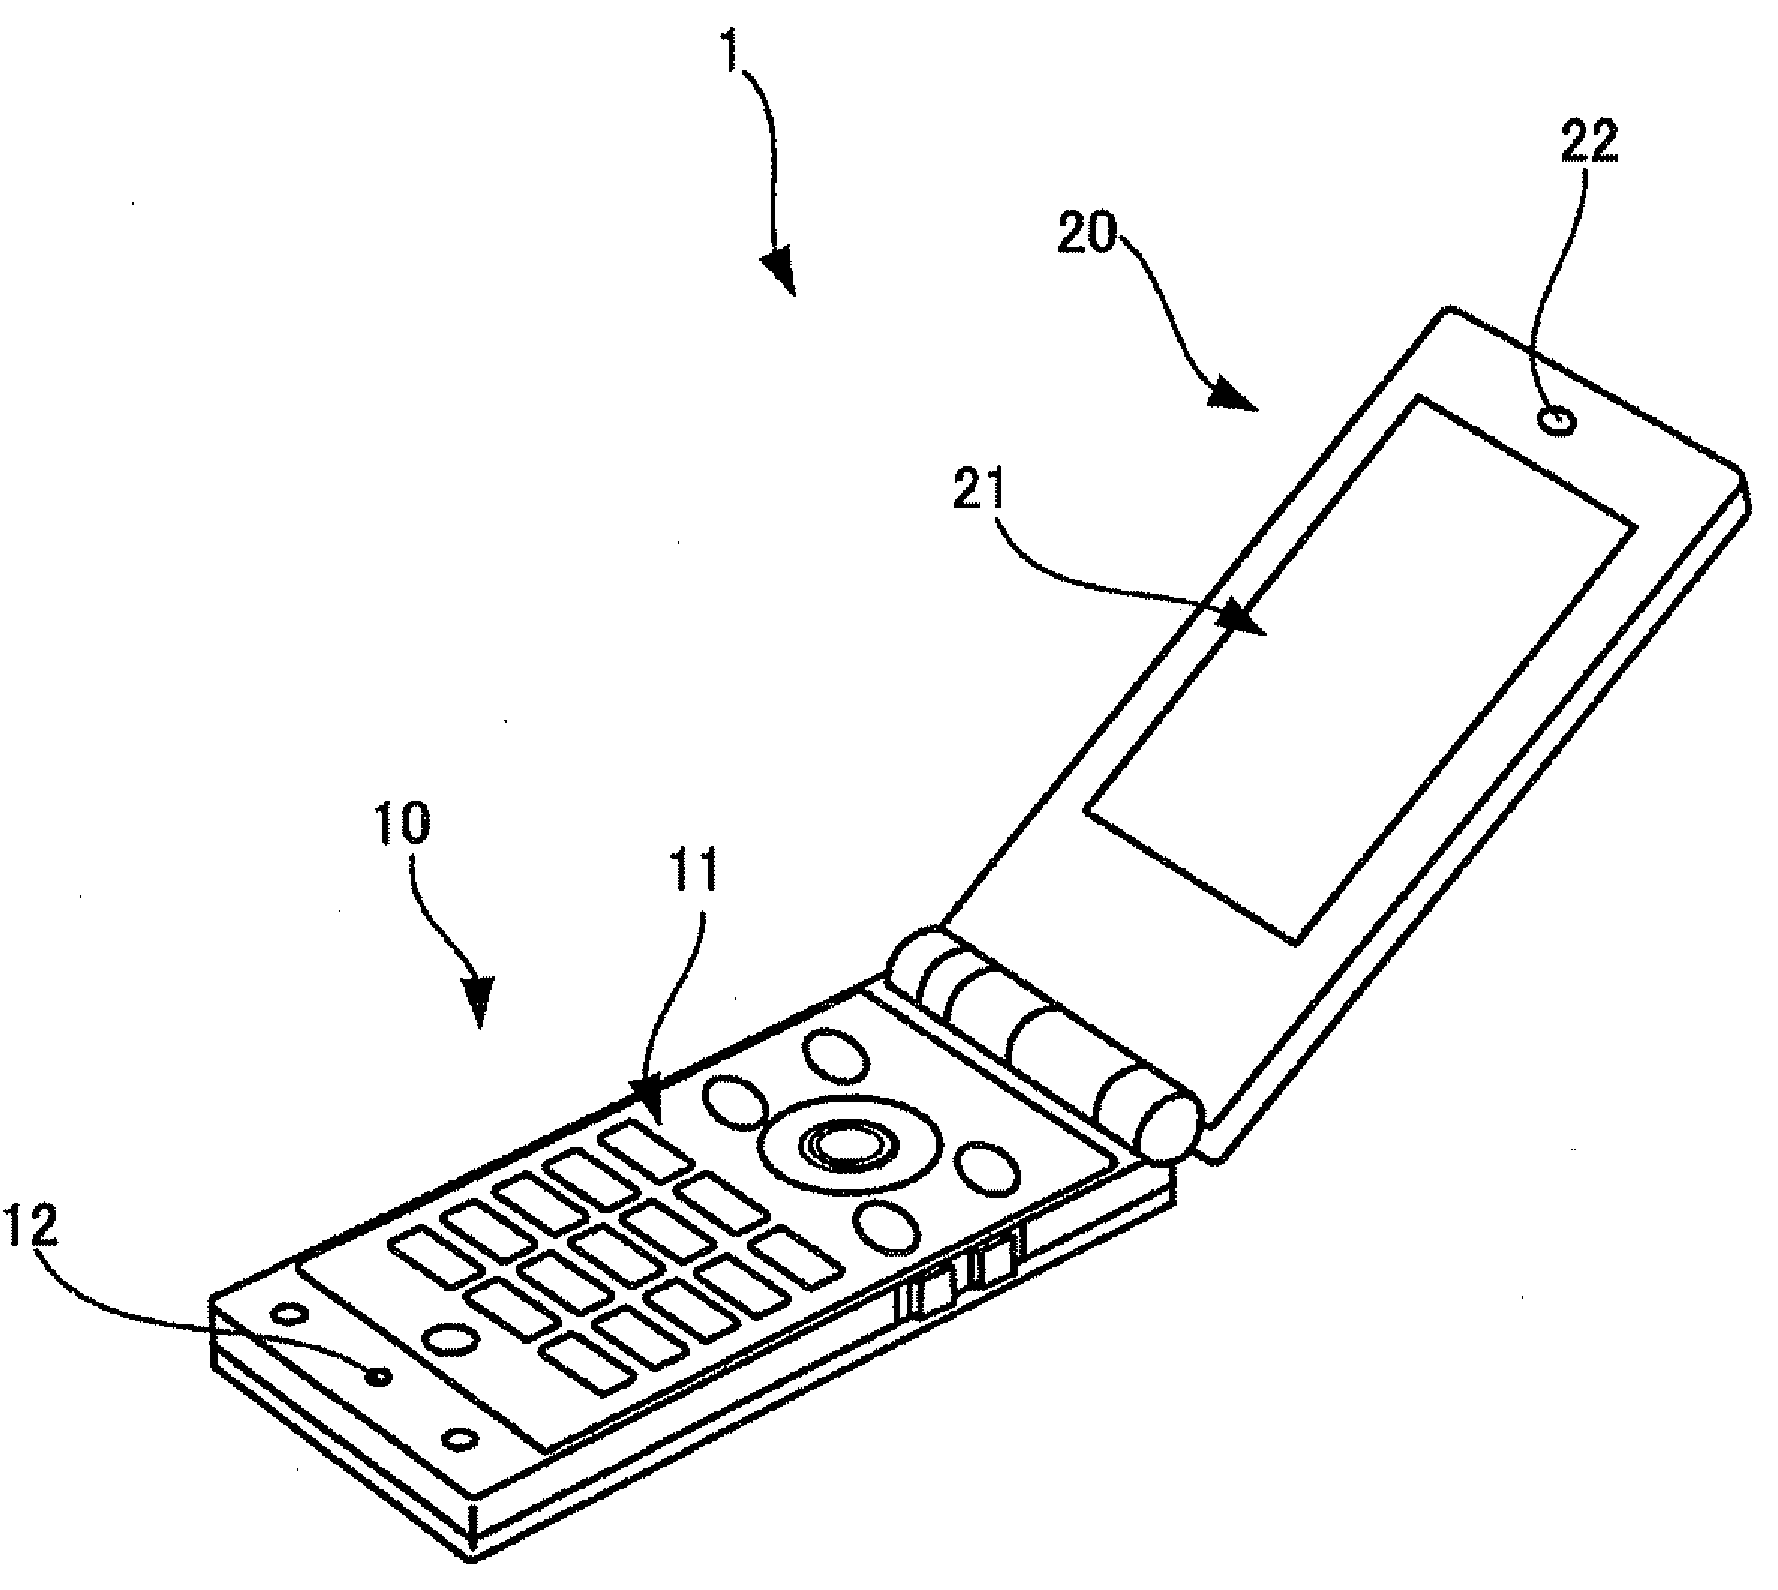 Mobile device